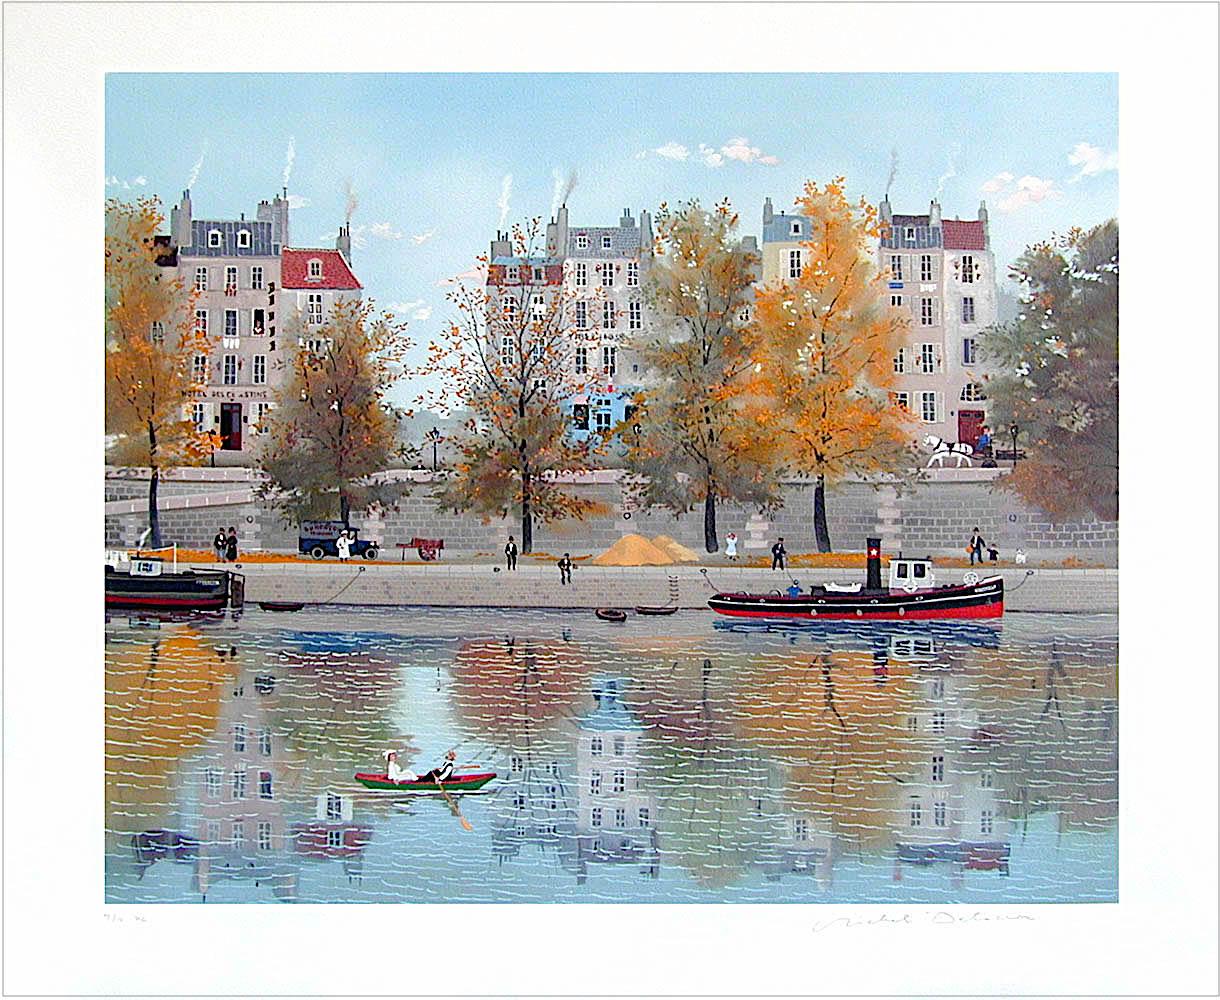 LE CANOTIER(Dernier beaux jours d'ete) THE BOATER(last beautiful days of summer) is an original hand drawn limited edition lithograph(not a photo reproduction or digital print) by the popular French artist Michel Delacroix, well known for his naif